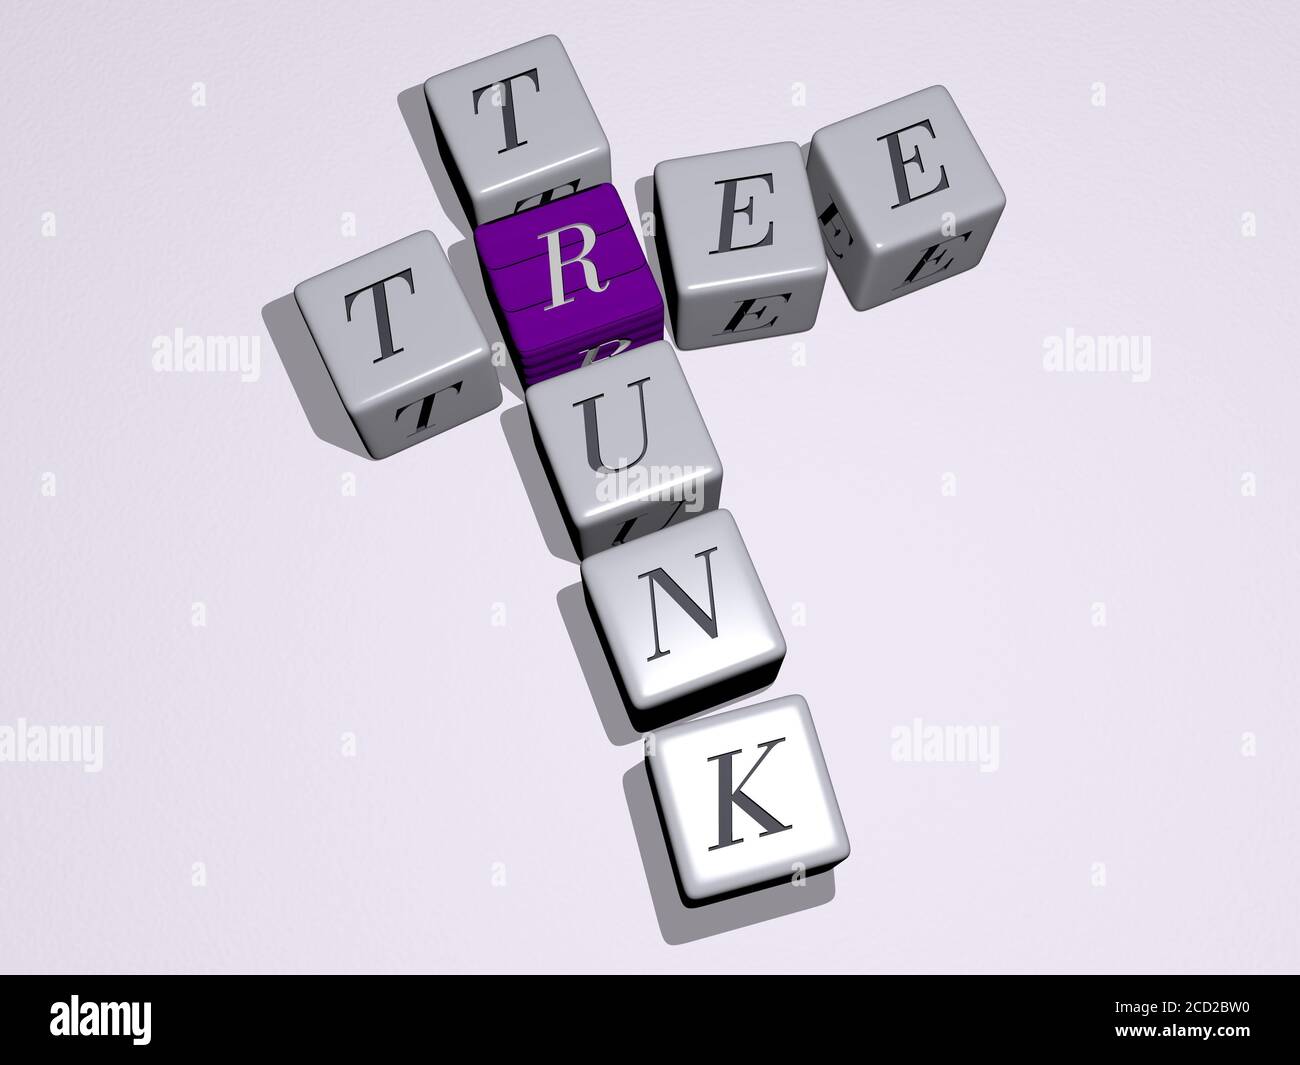 tree trunk crossword by cubic dice letters 3D illustration Stock Photo